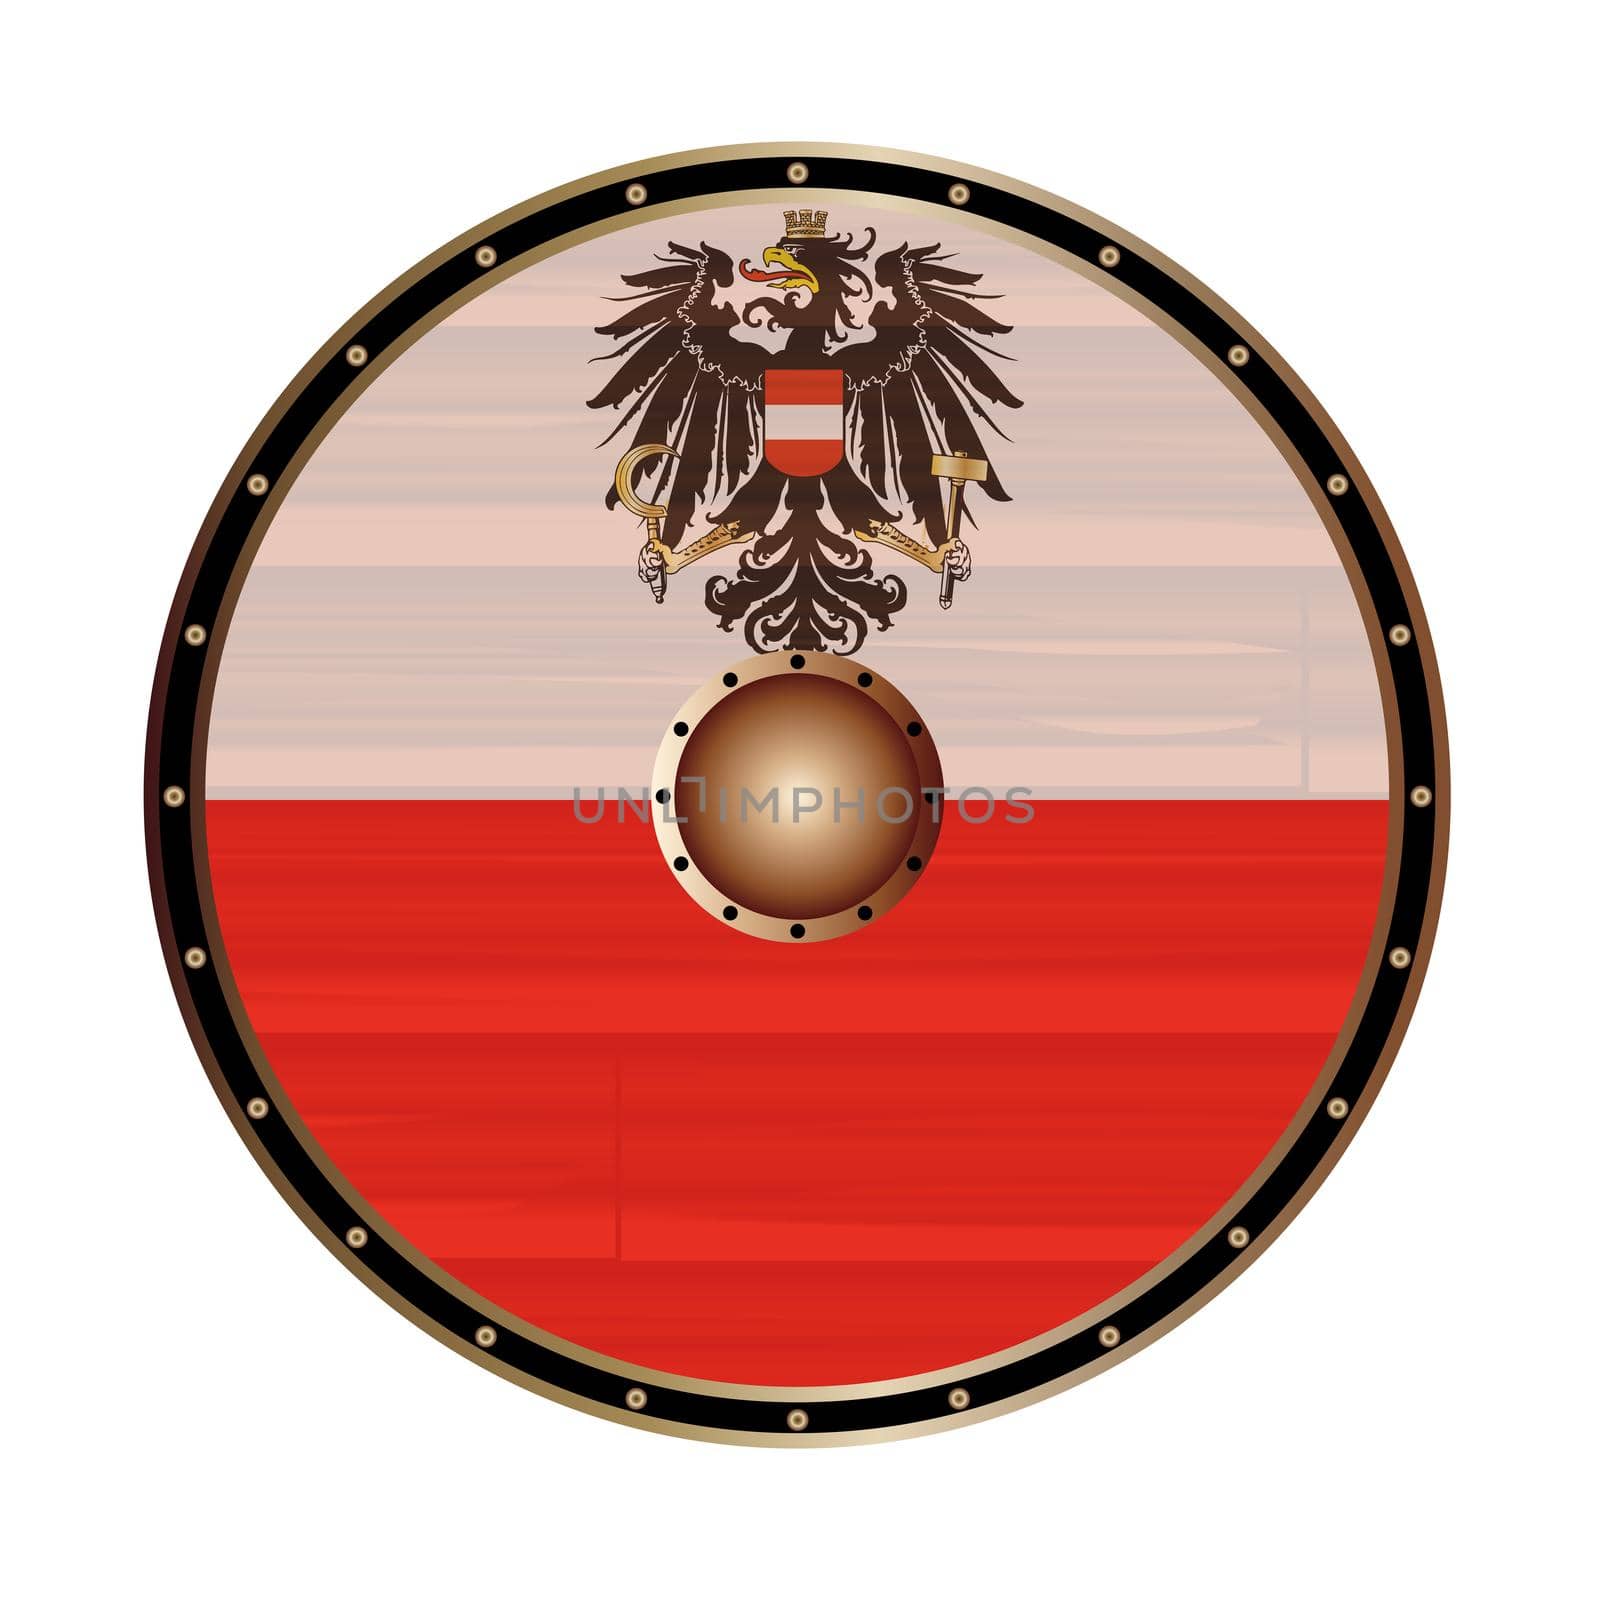 A Viking round shield with the Austrian flag color design isolated on a white background